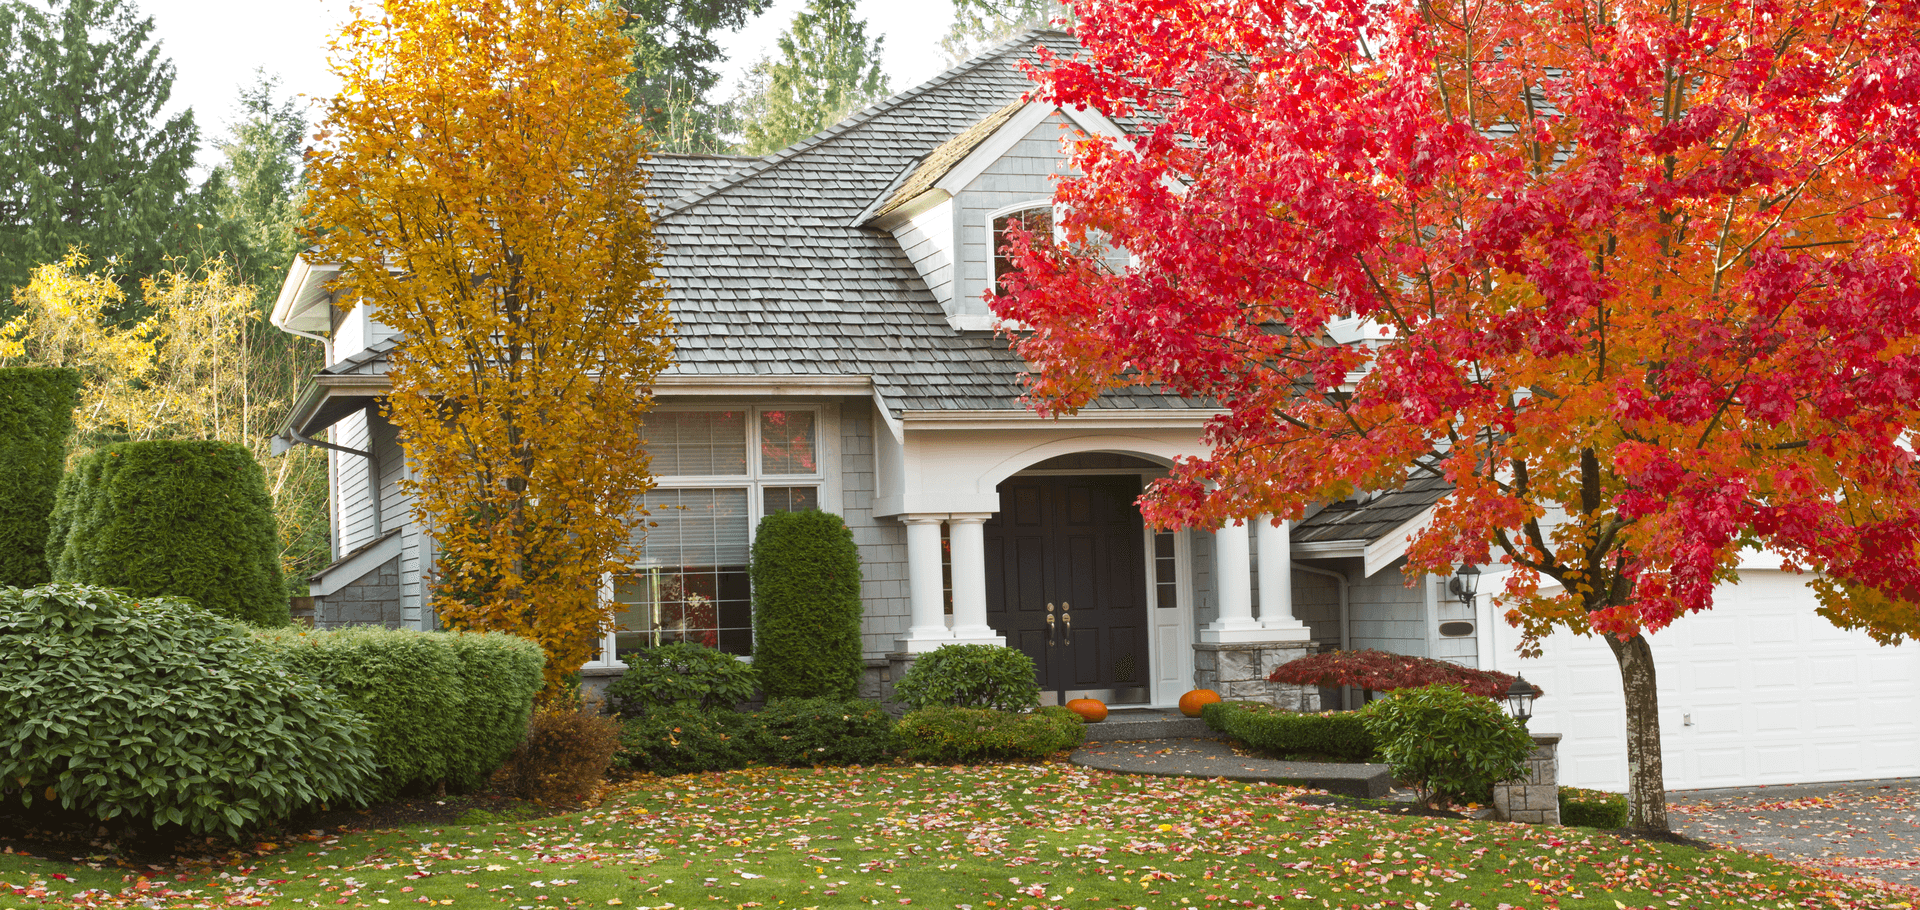 How to care for your lawn in the fall